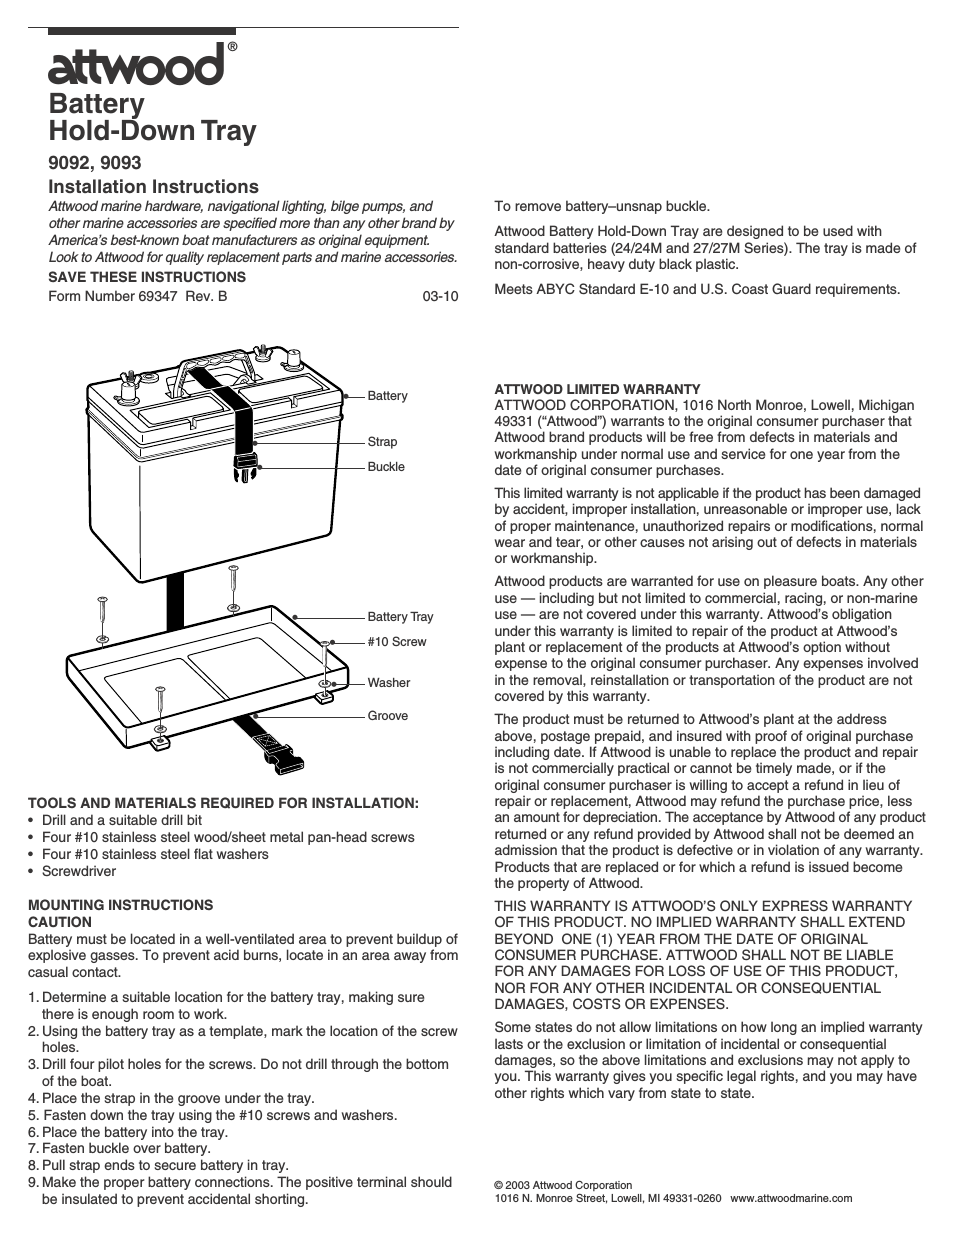 Attwood Battery Tray with Strap User Manual | 1 page